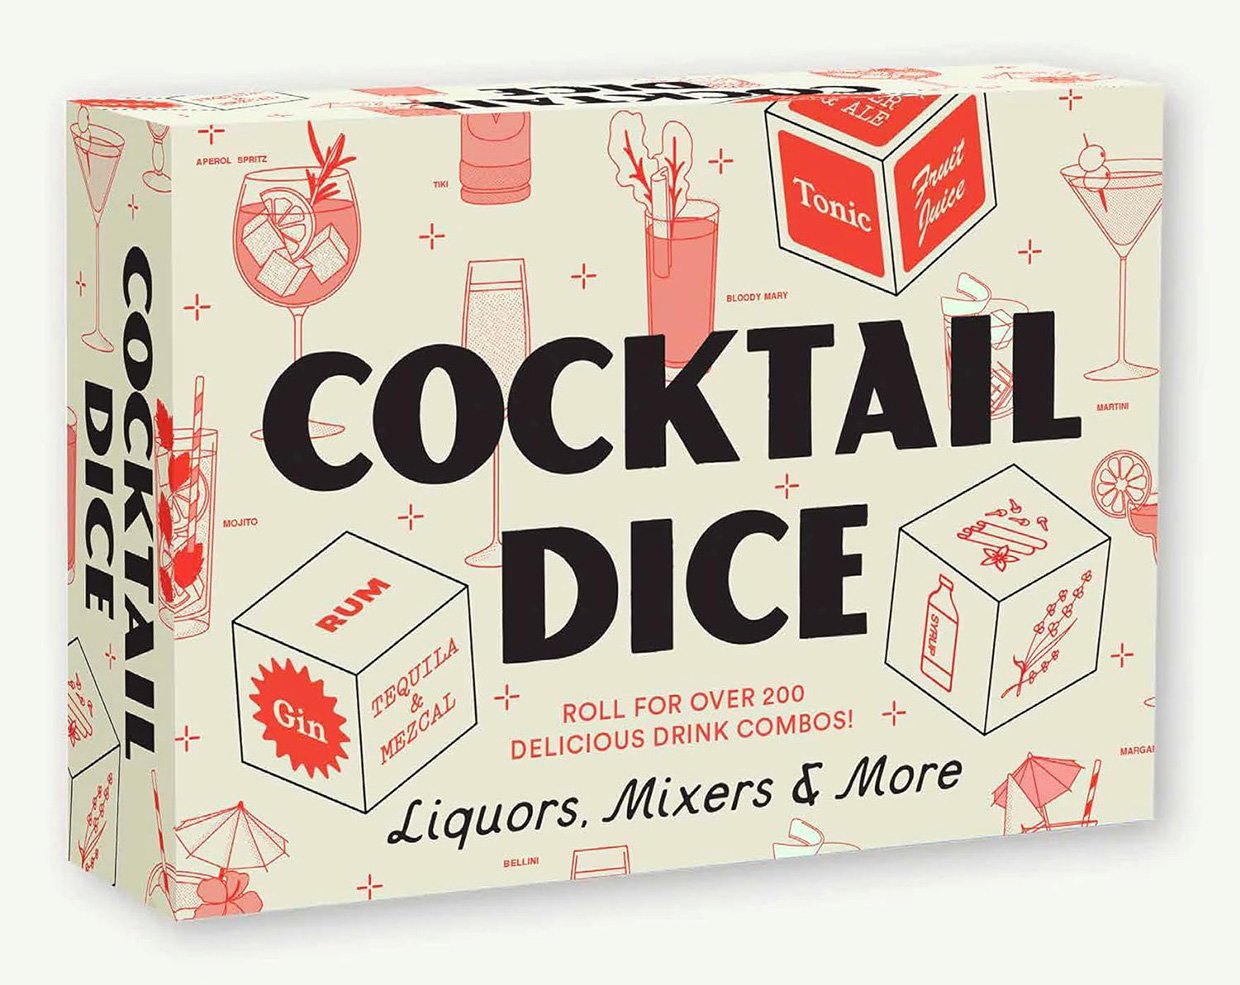 Chronicle Books’ Cocktail Dice